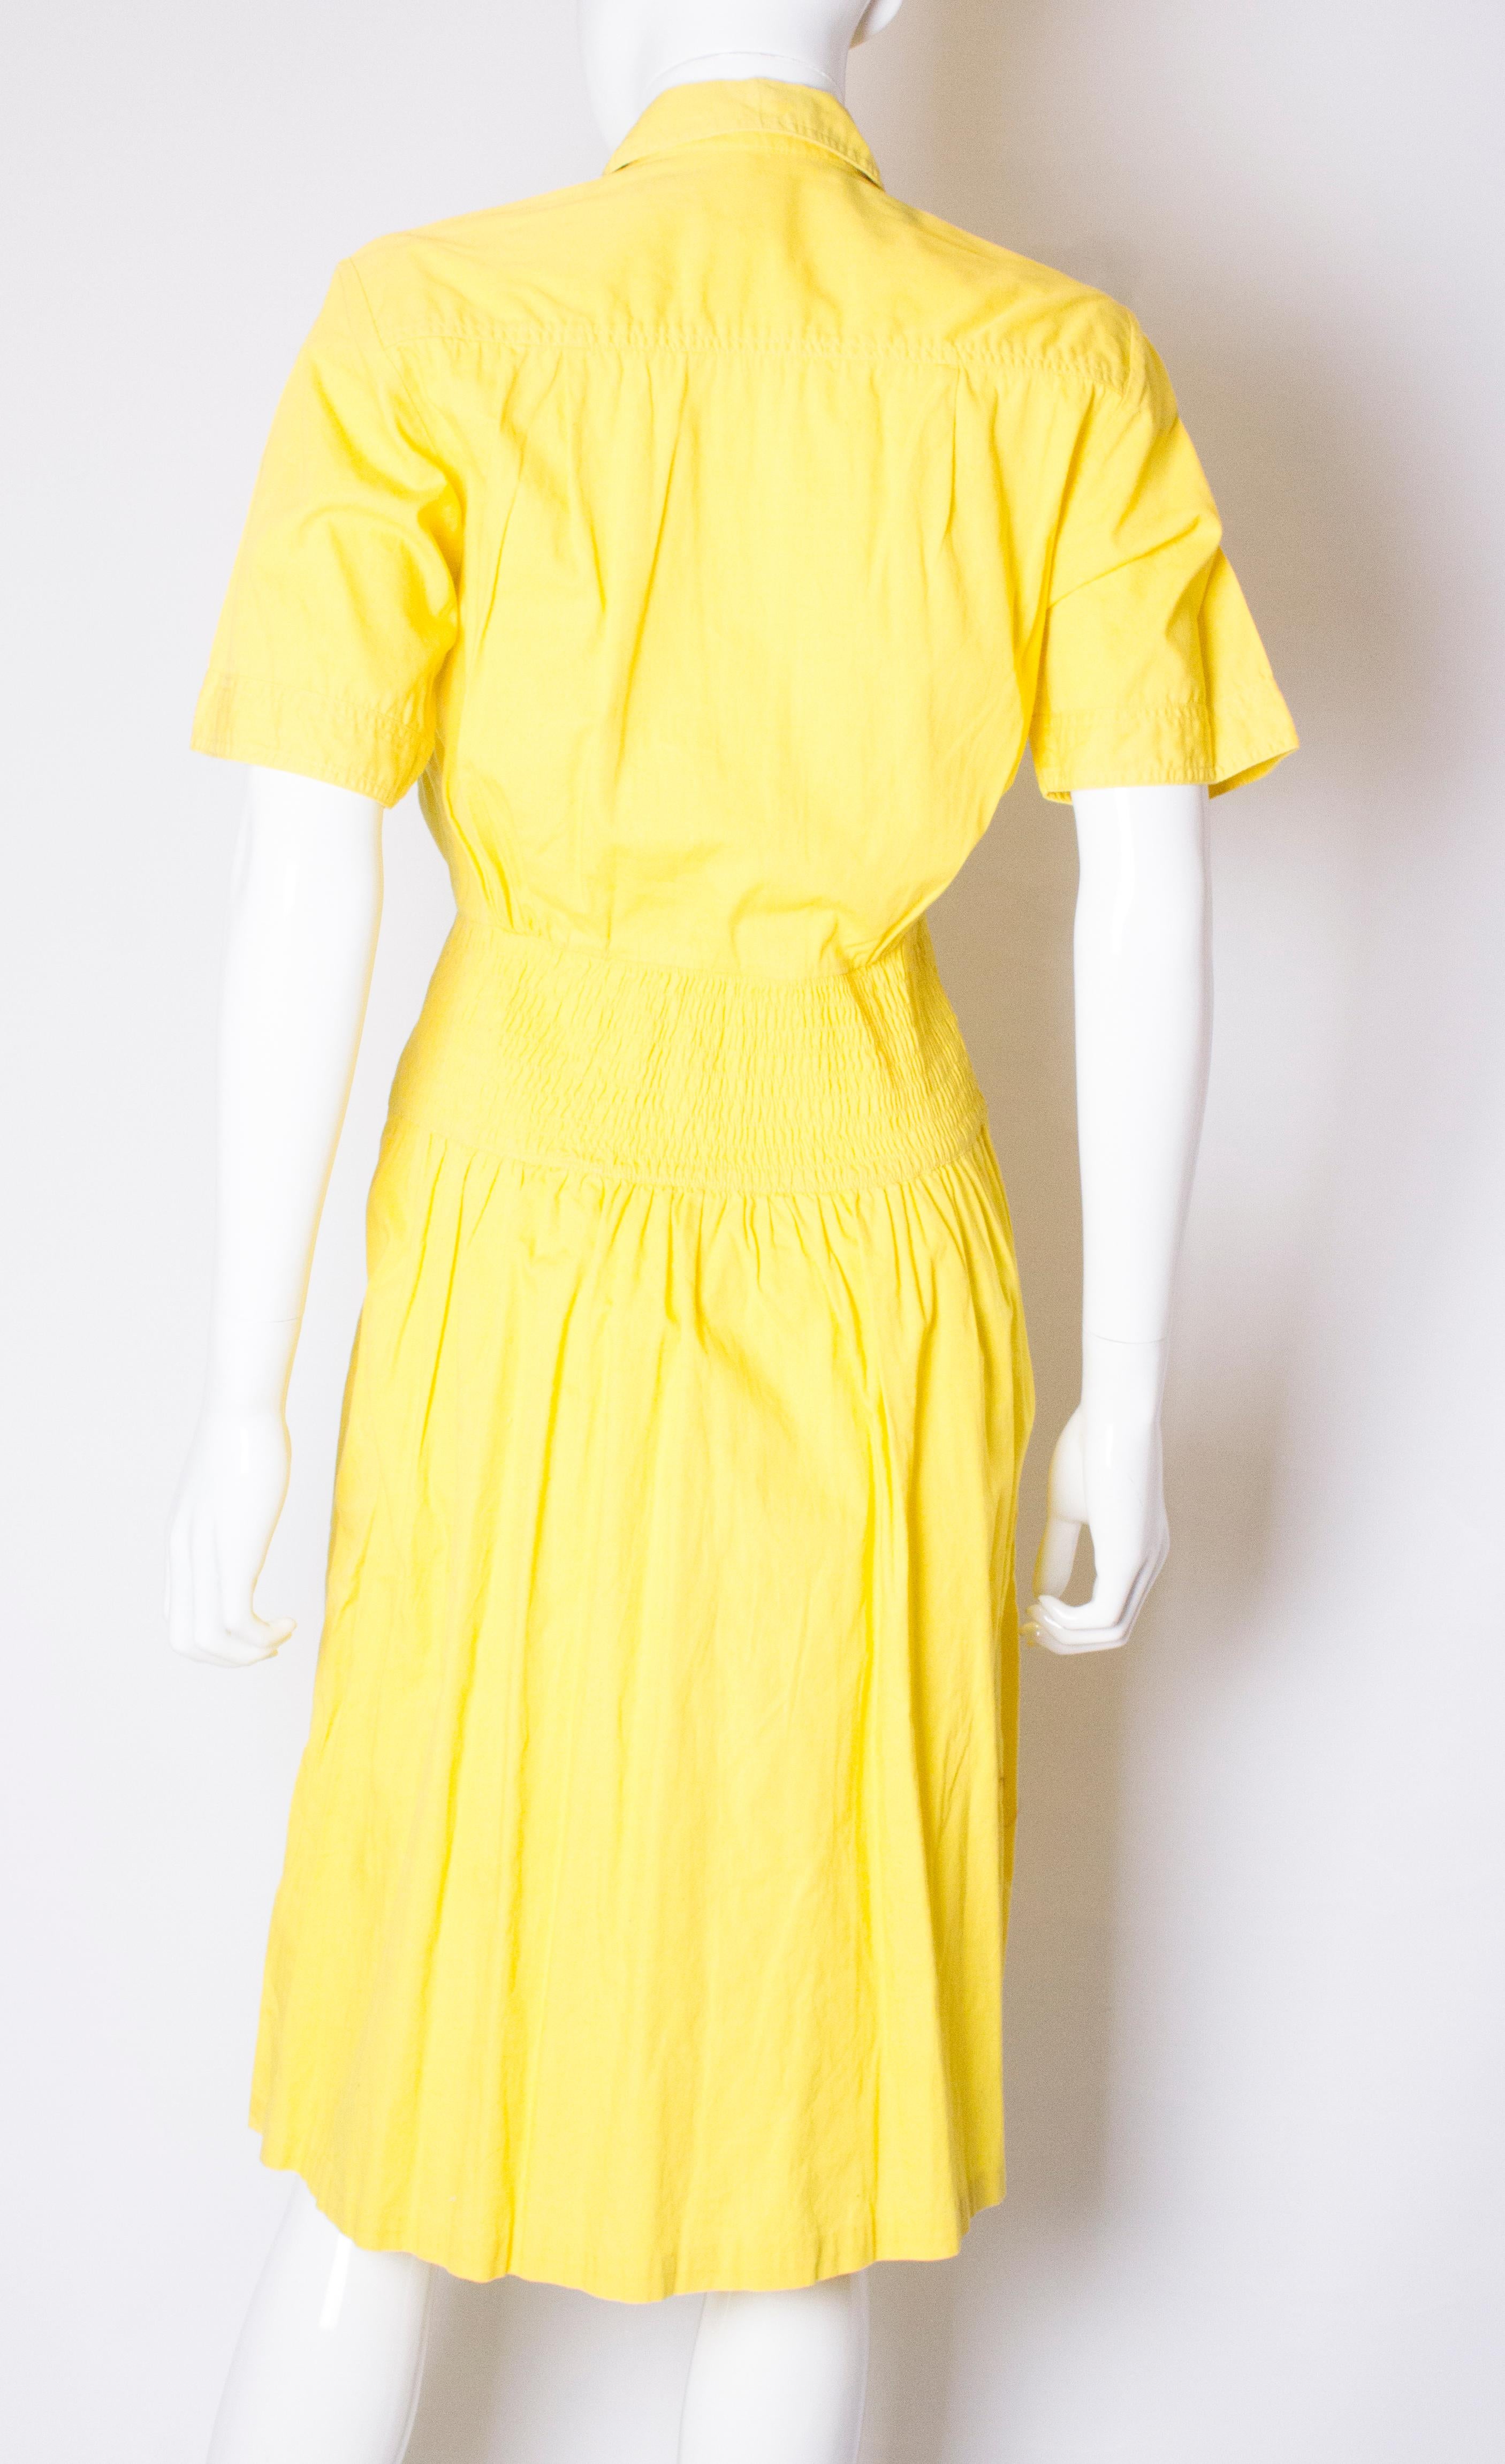 Women's Vintage Yellow Cotton Day Dress For Sale